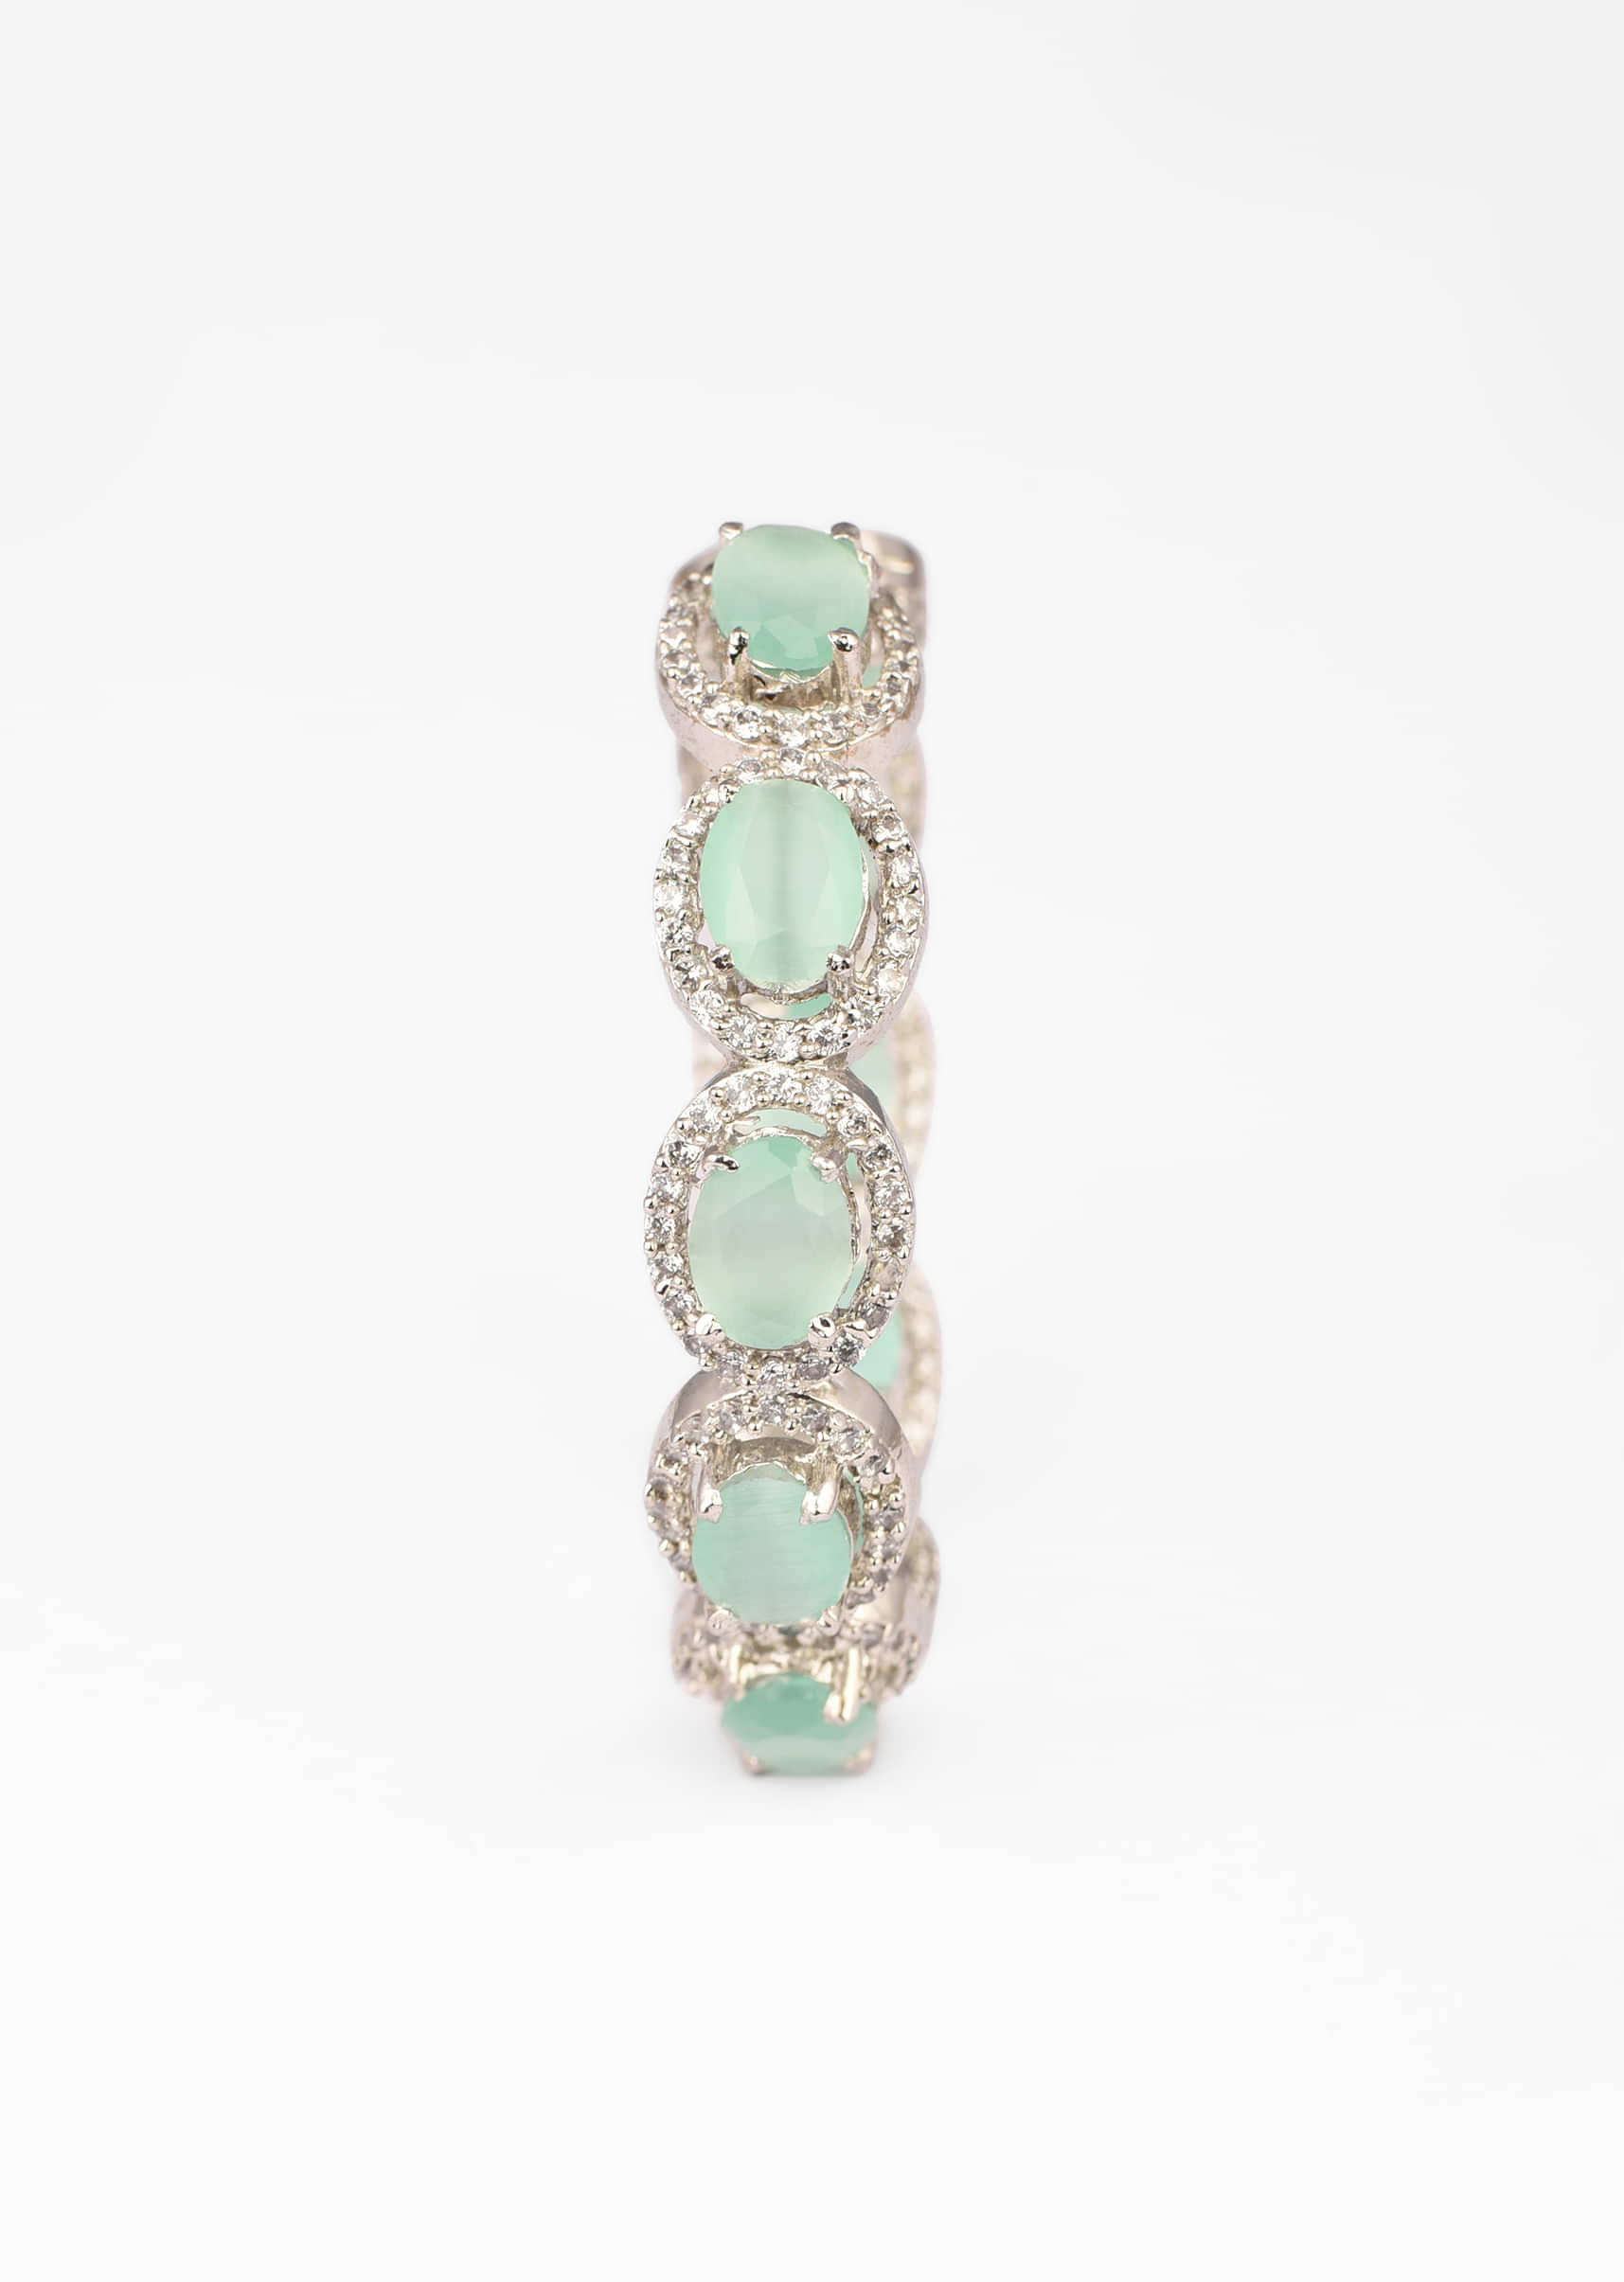 Mint Green Stone Studded Hoop Earrings With Swarovski Accents 